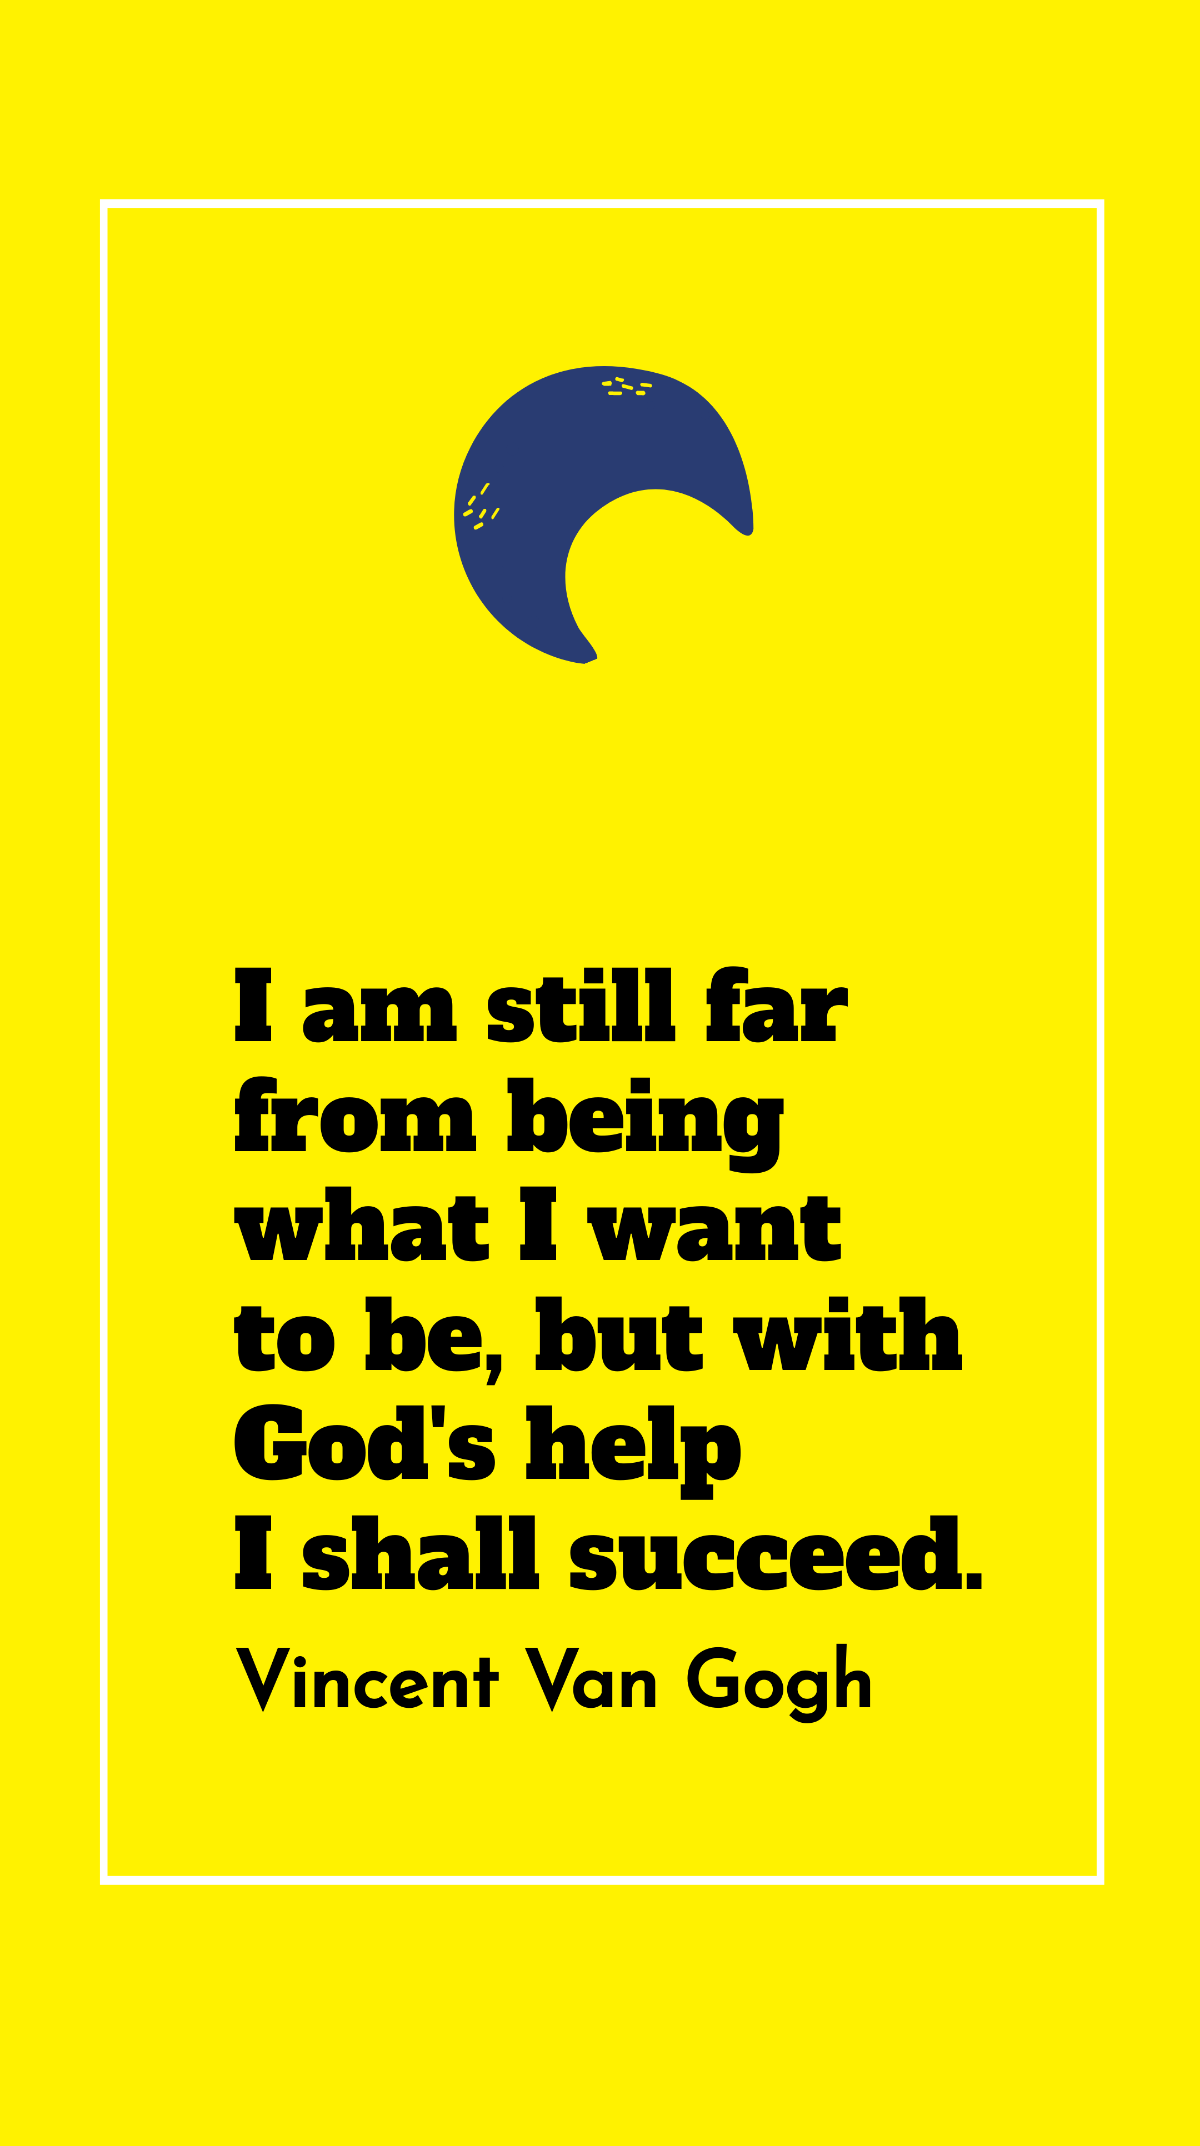 Vincent Van Gogh - I am still far from being what I want to be, but with God's help I shall succeed.